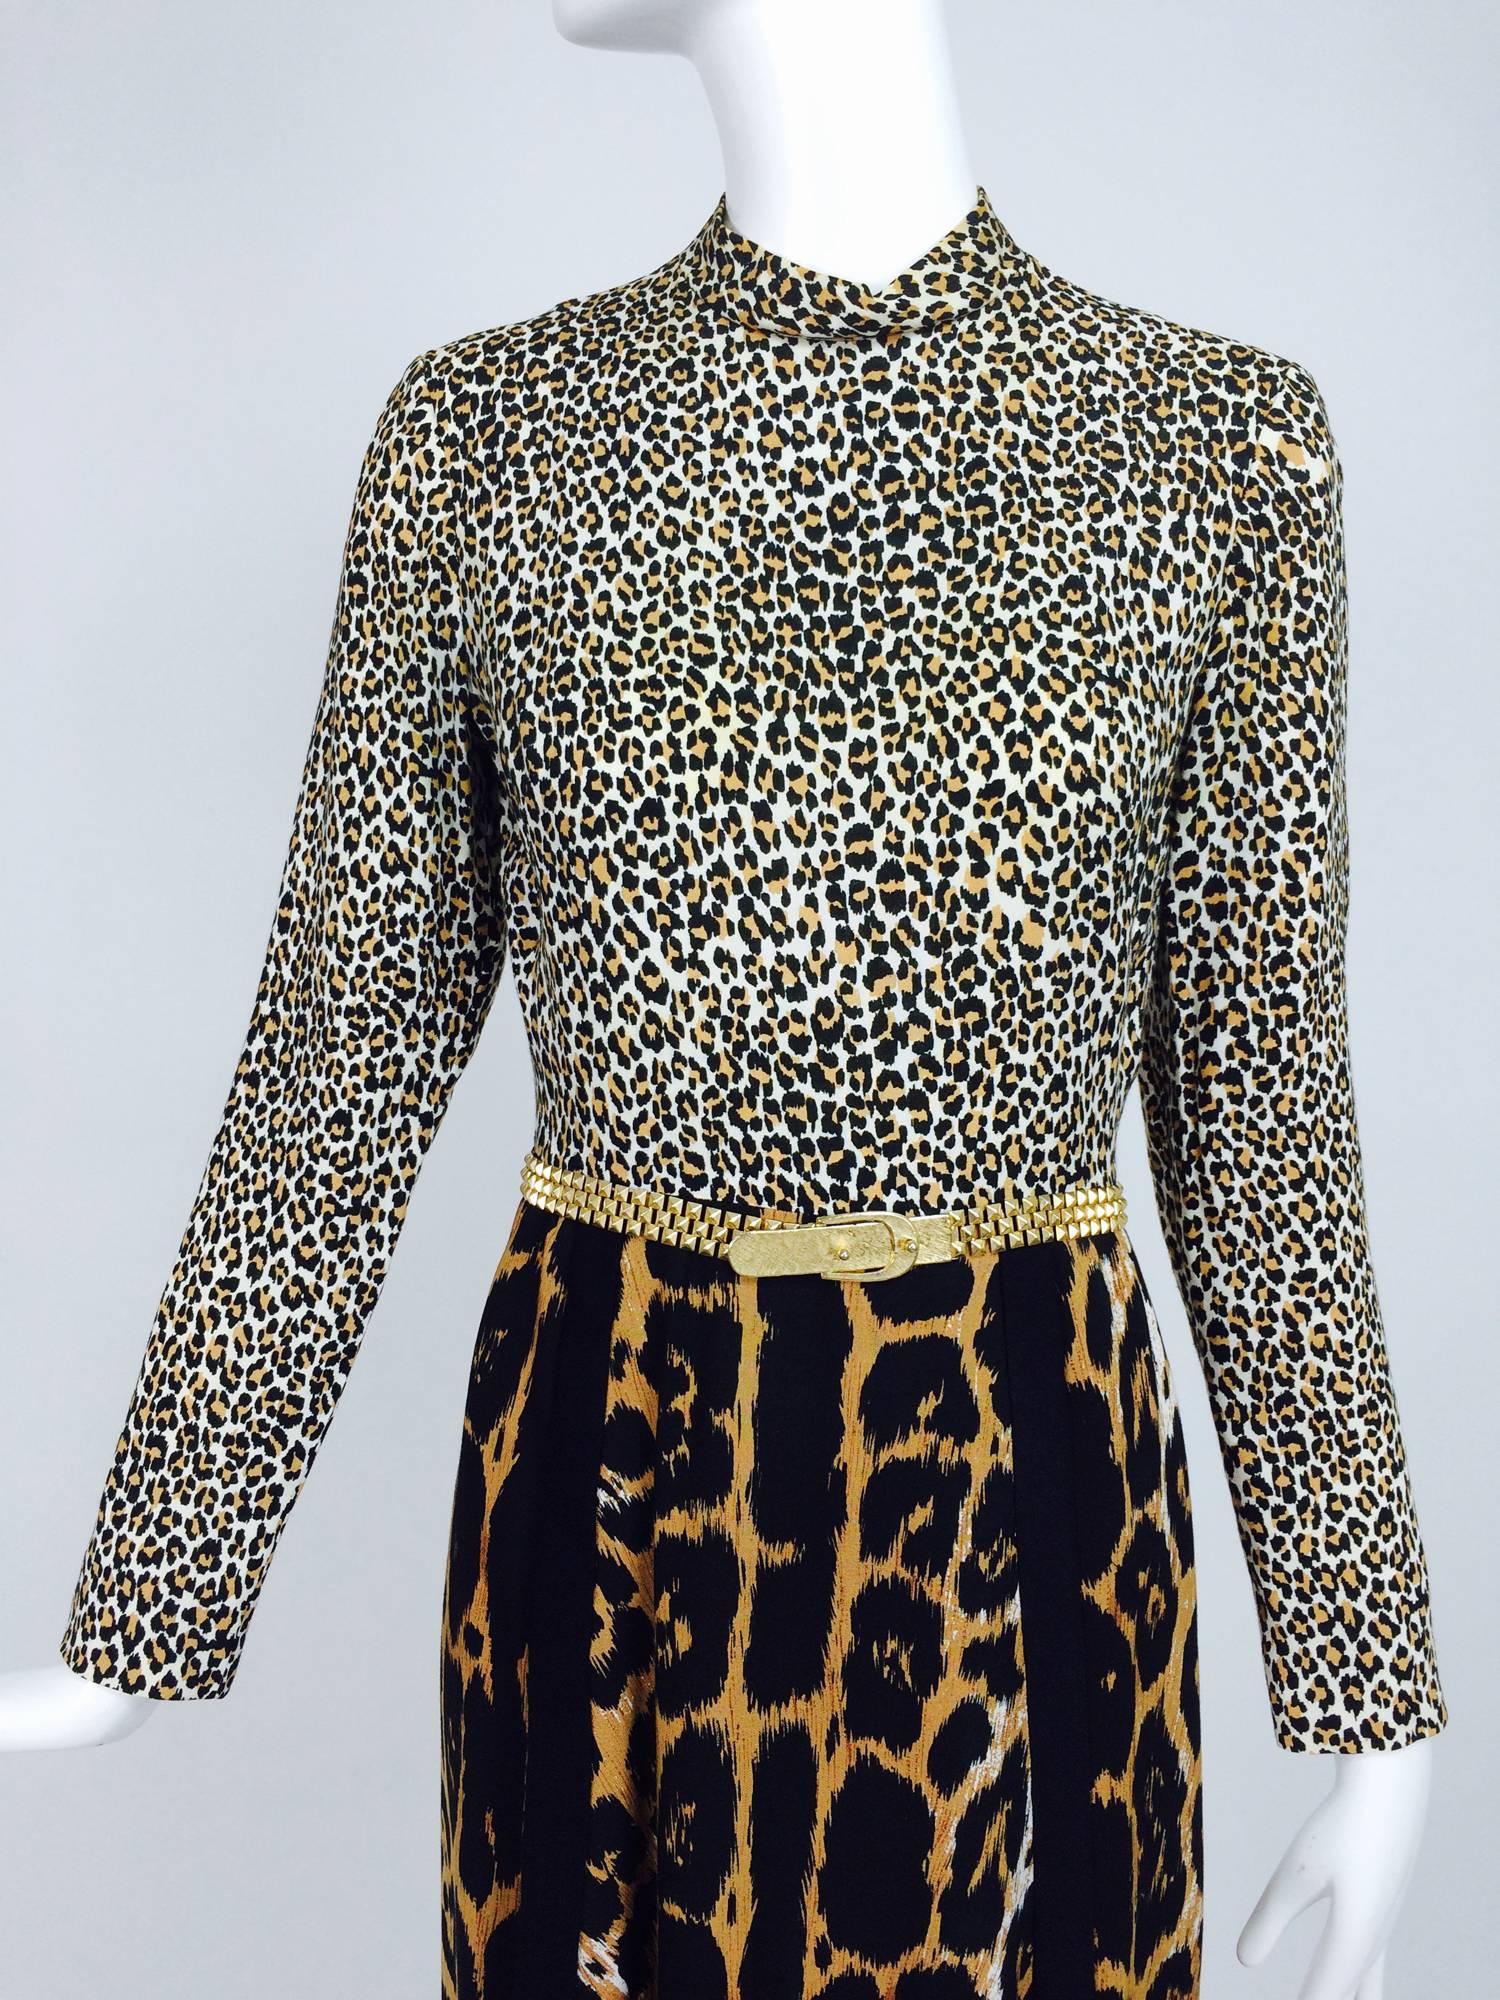 Leopard print maxi dress from the 1970s, labeled Ole Borden for Rembrandt and Martha, AKA, Martha Phillips who had one of the most successful retail fashion businesses of the 20th Century. She loved spotting new design talent and launched many a